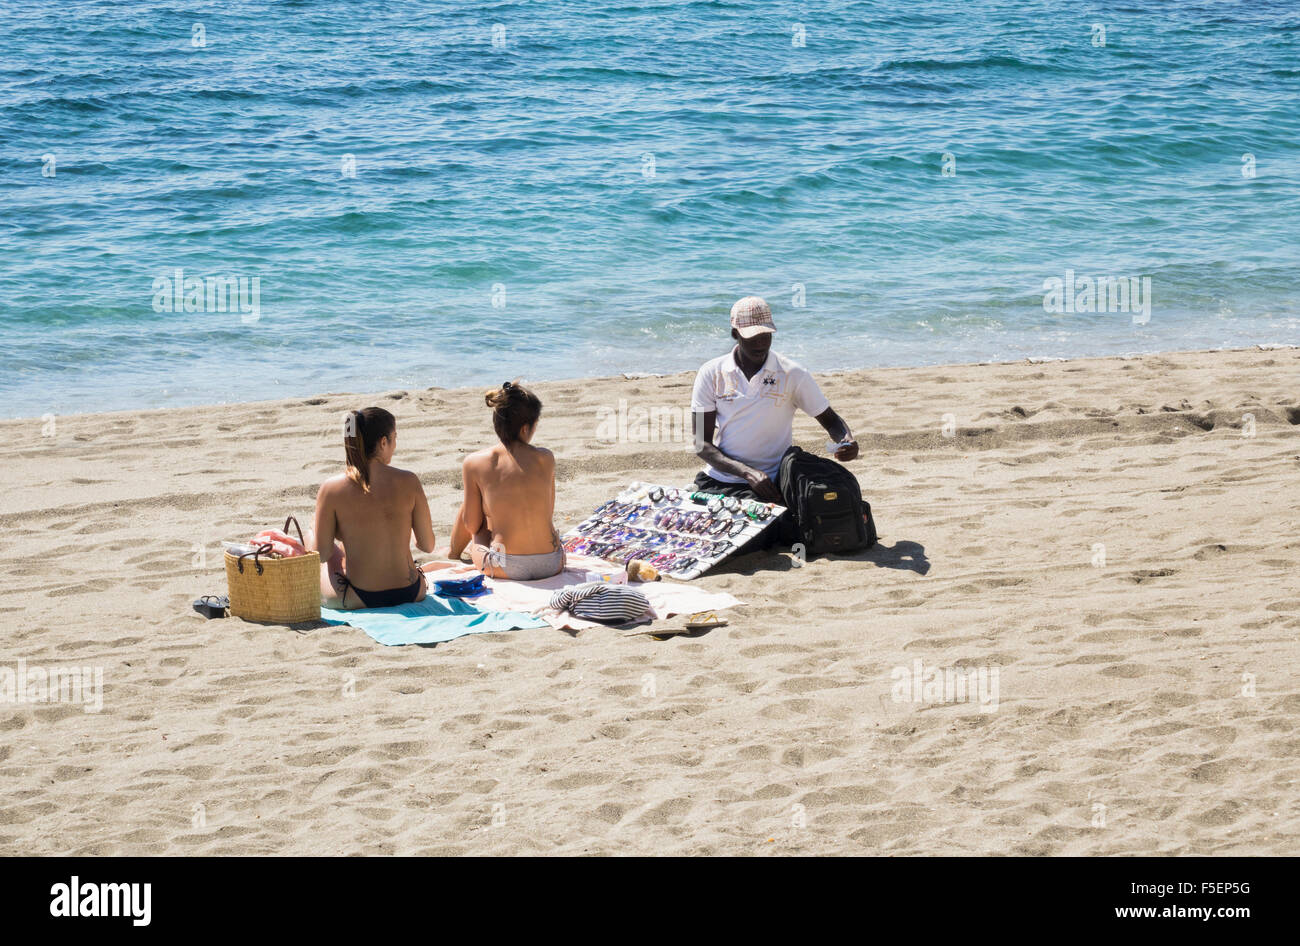 African man selling sunglasses to tourists on the beach in Marbella, Spain Stock Photo